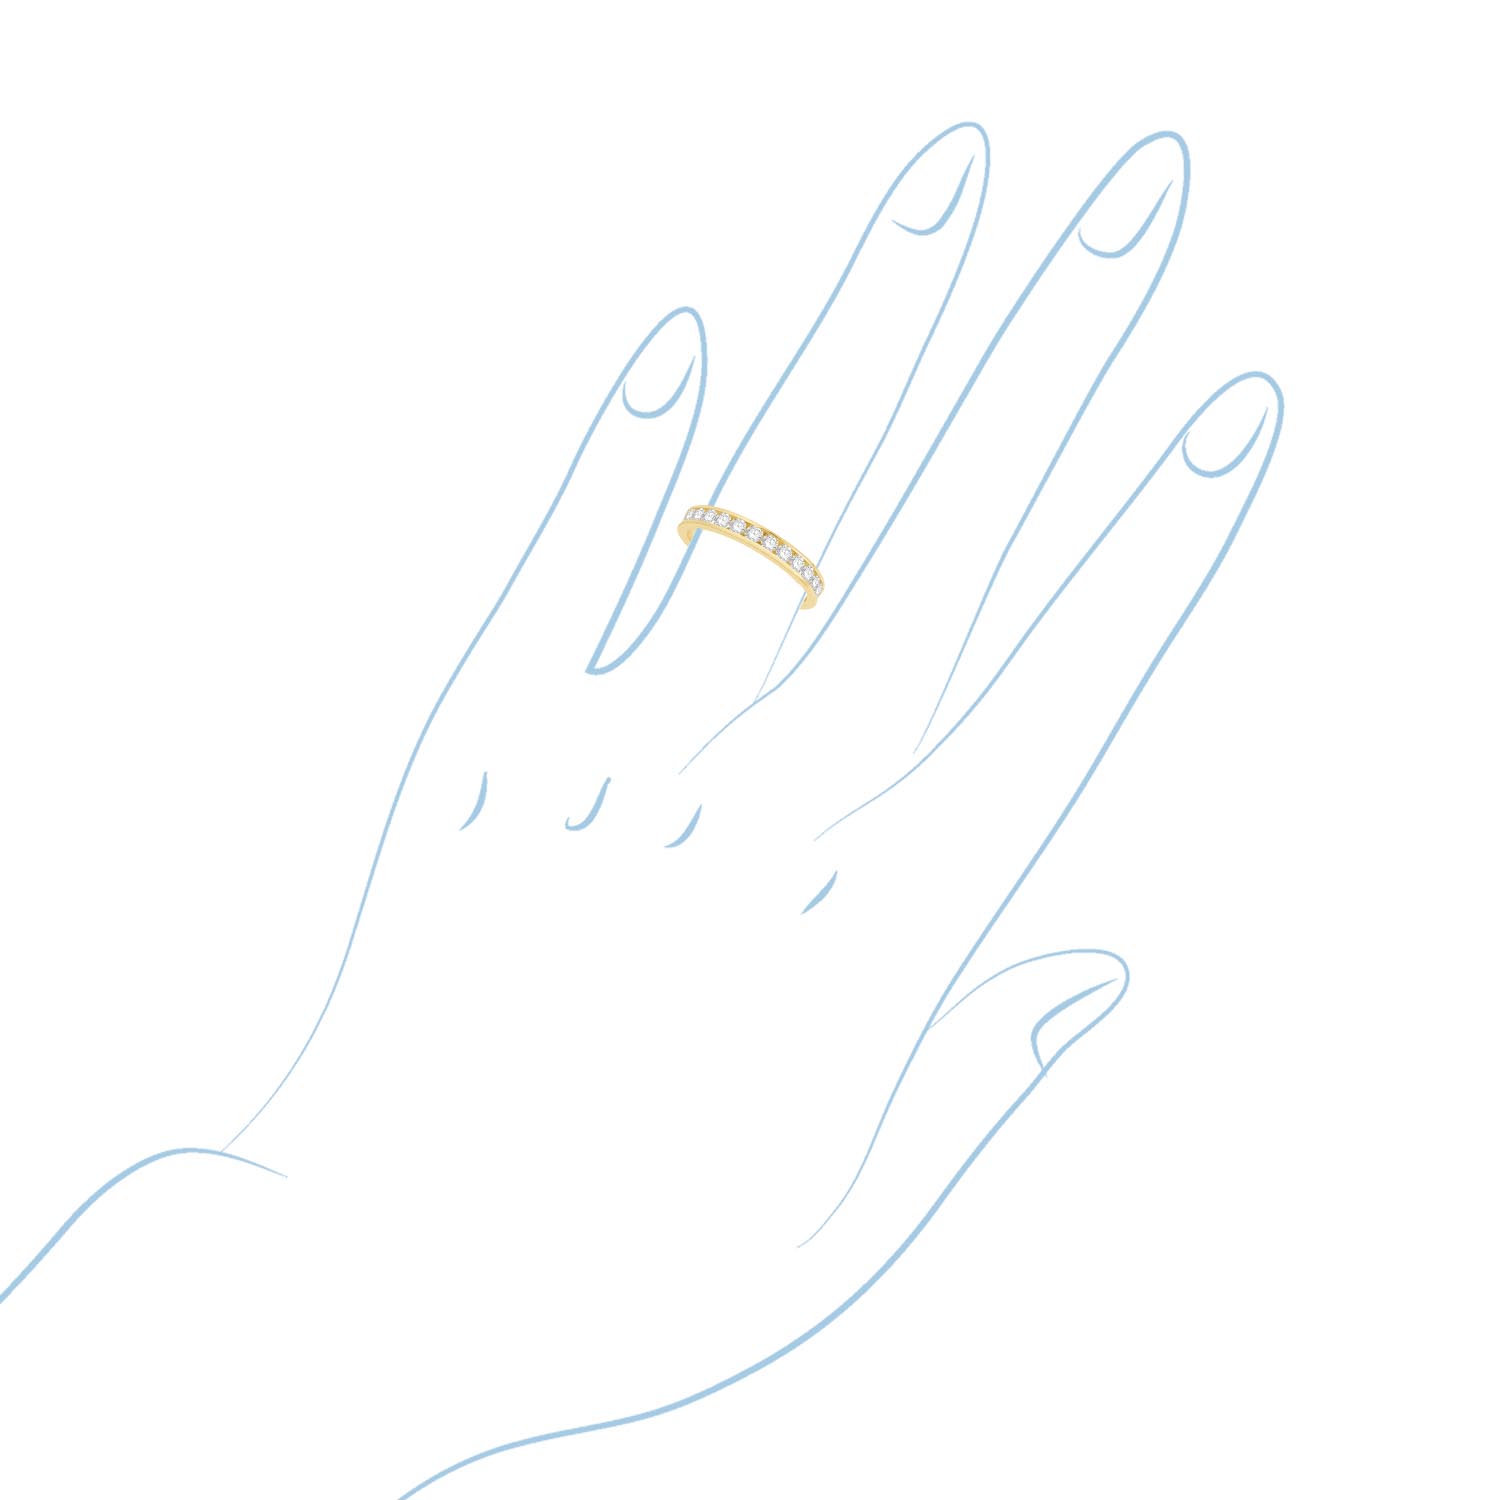 Northern Star Diamond Anniversary Band in 14kt Yellow Gold (1/2ct tw)